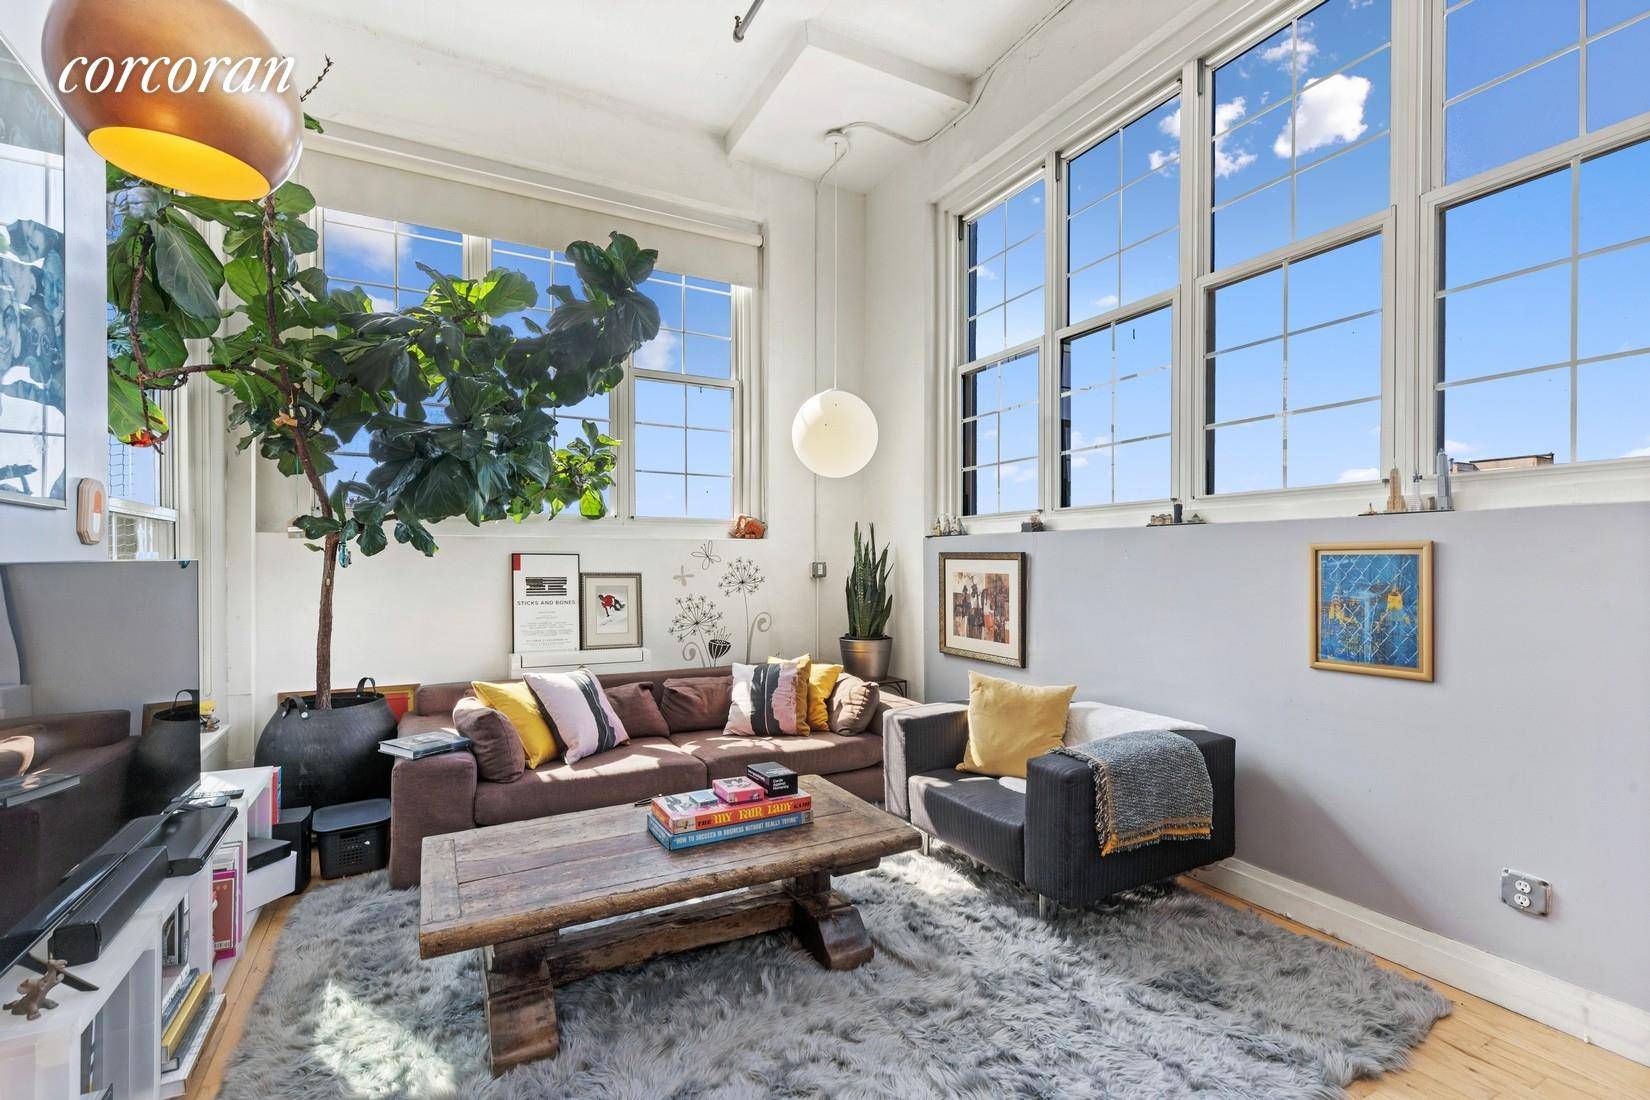 With a footprint of almost 1200 square feet and yards of windows facing Manhattan, this quintessential loft with 13' ceilings and industrial accents truly epitomizes New York living.